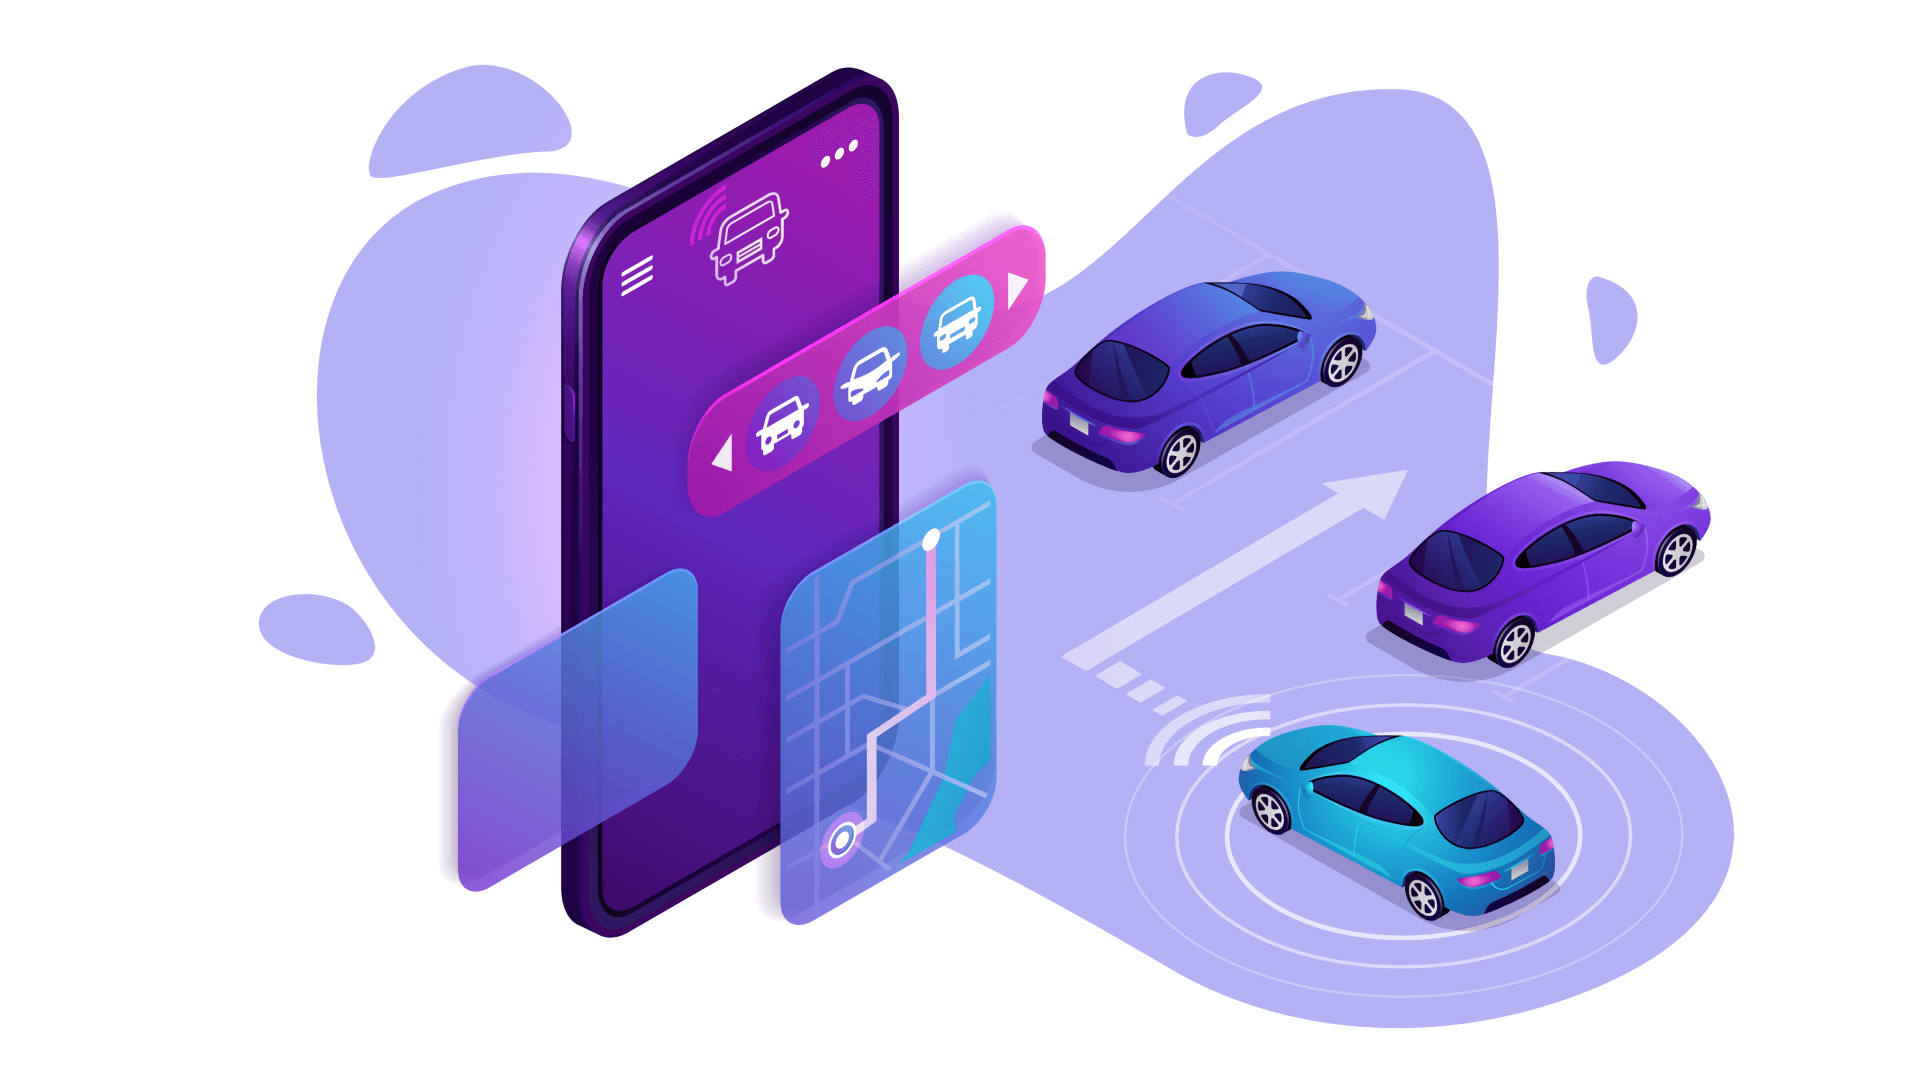 Gartner predicts that in 2021 almost 90% of businesses will have their app. By creating a good parking app, you have a chance to immortalize your name in the history of mobile app development.